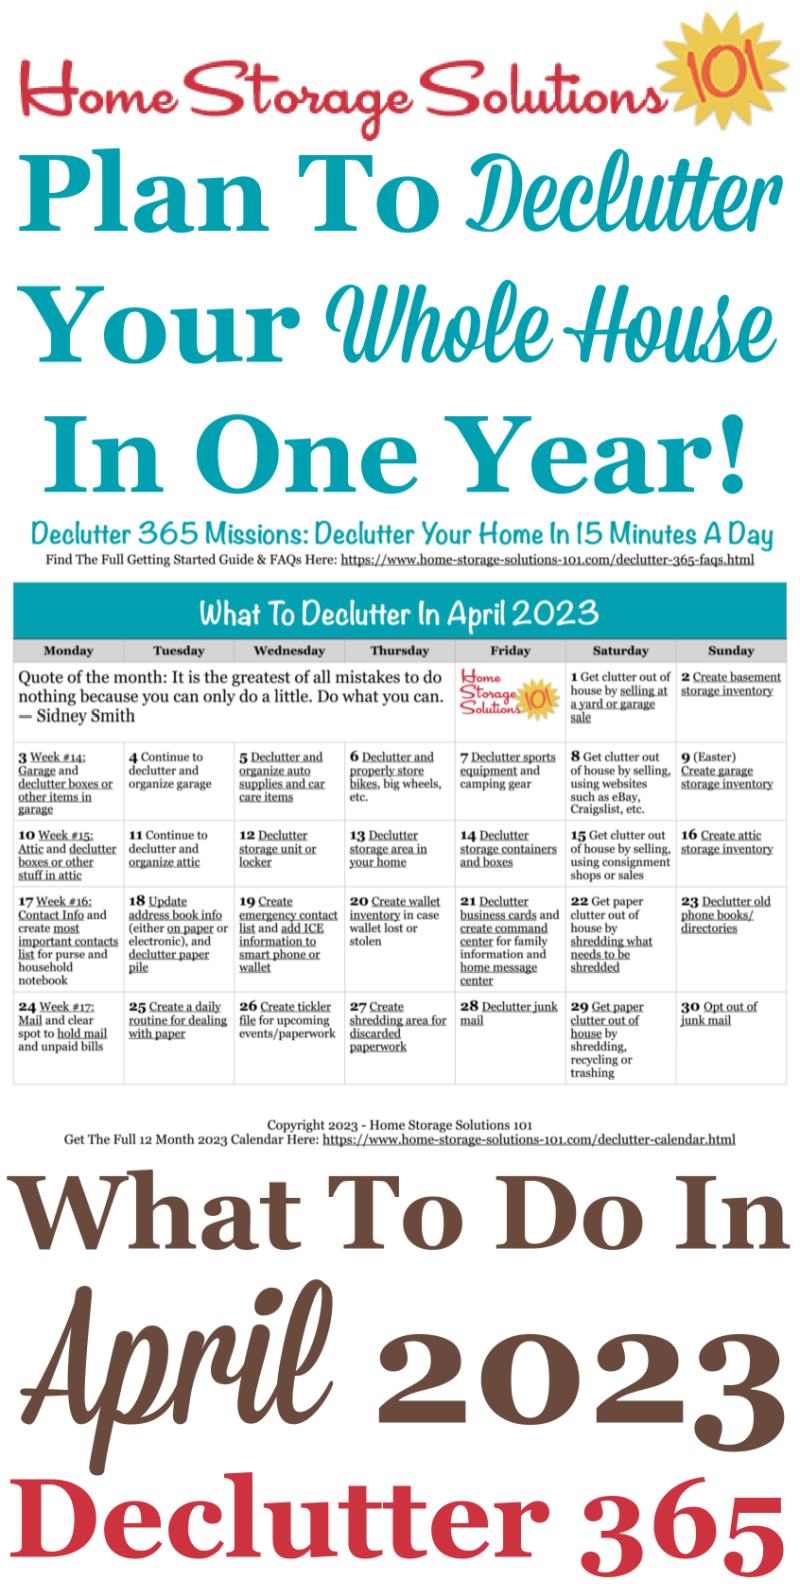 Free printable April 2023 #decluttering calendar with daily 15 minute missions. Follow the entire #Declutter365 plan provided by Home Storage Solutions 101 to #declutter your whole house in a year.